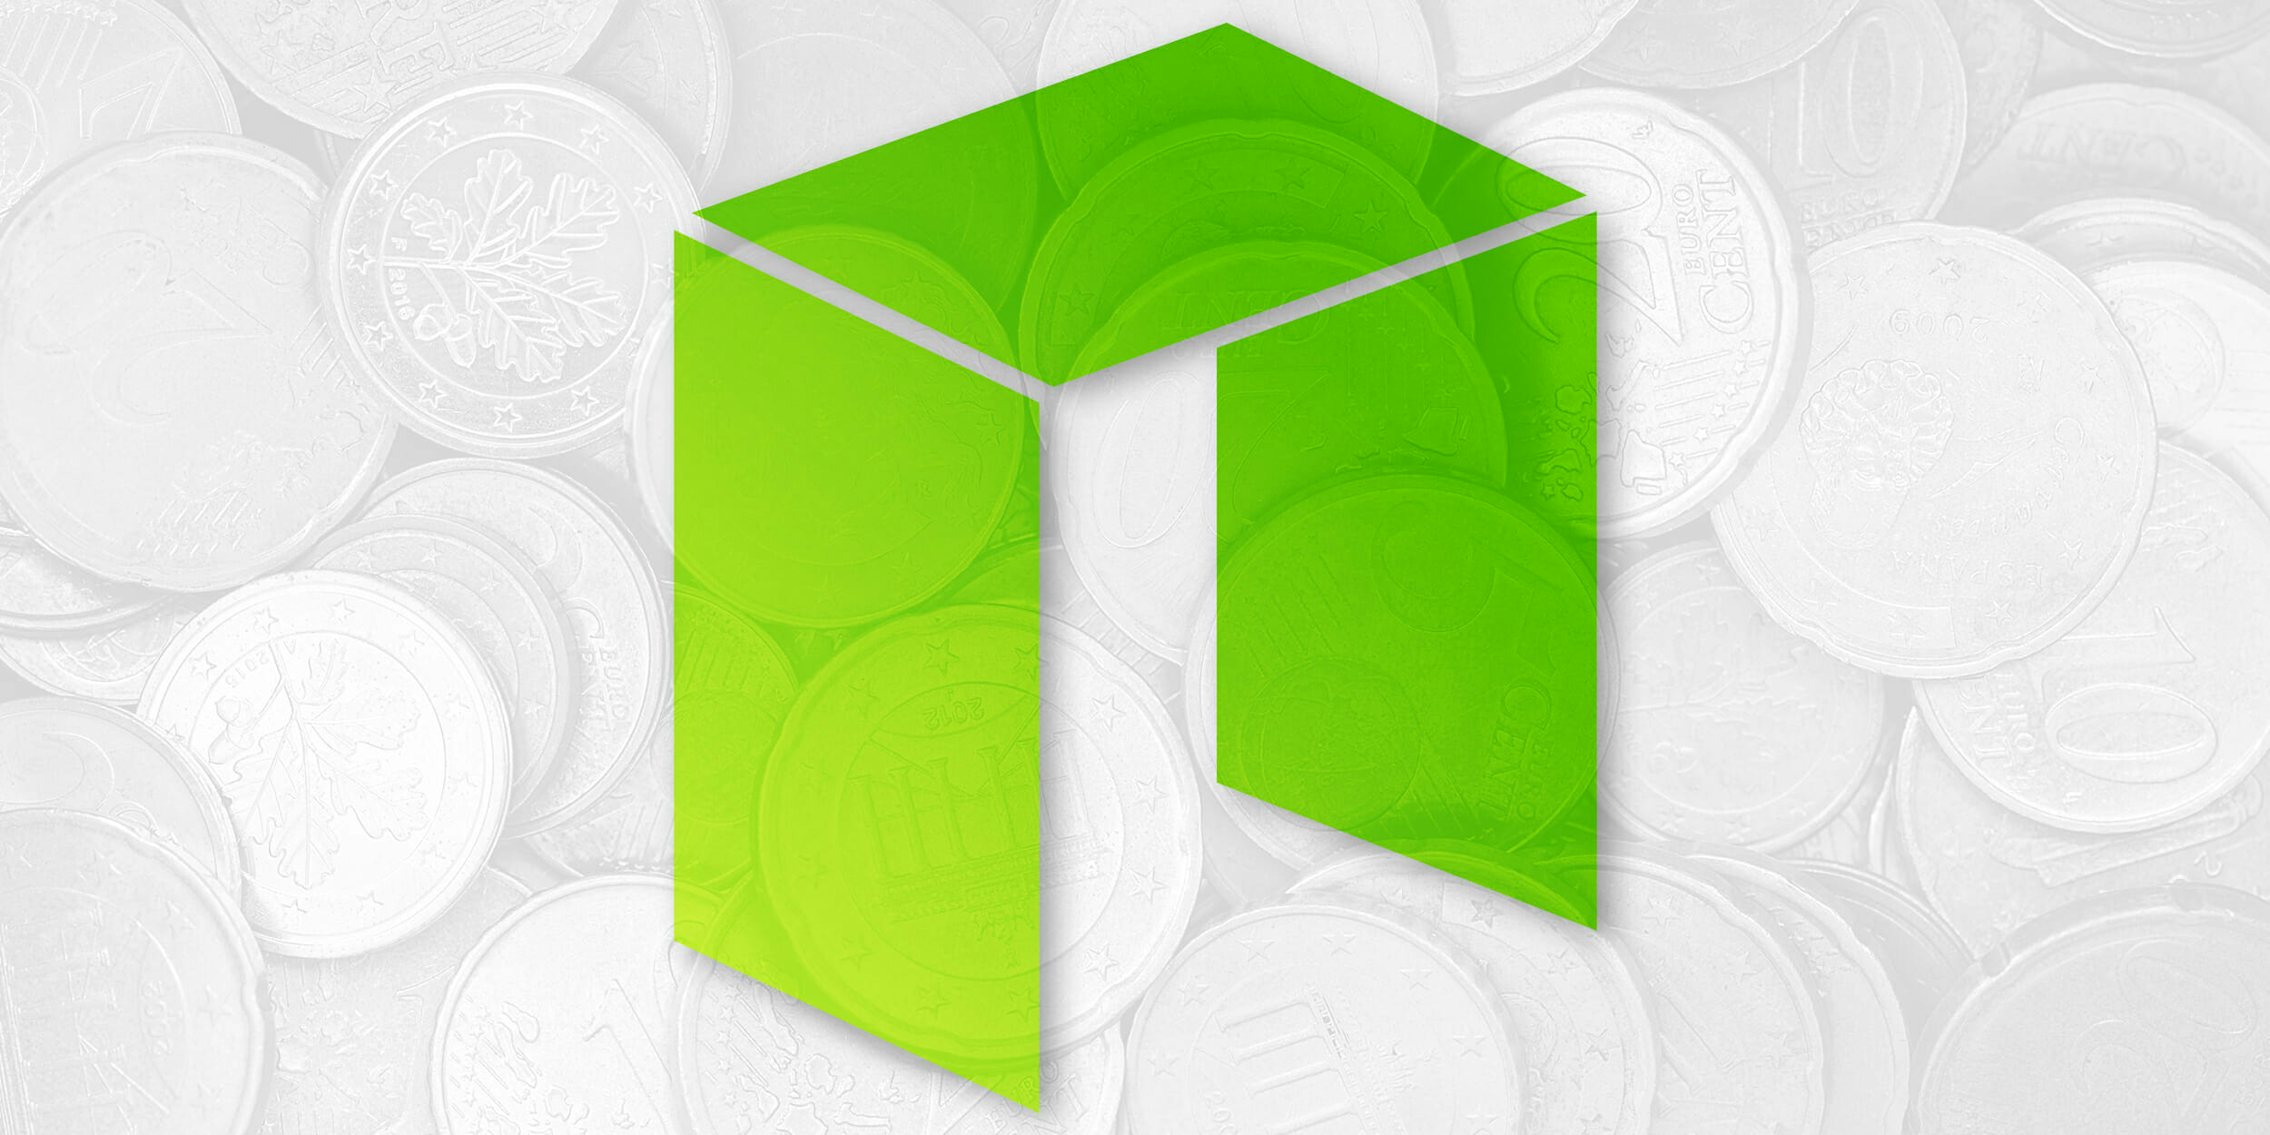 NEO cryptocurrency with coin overlay